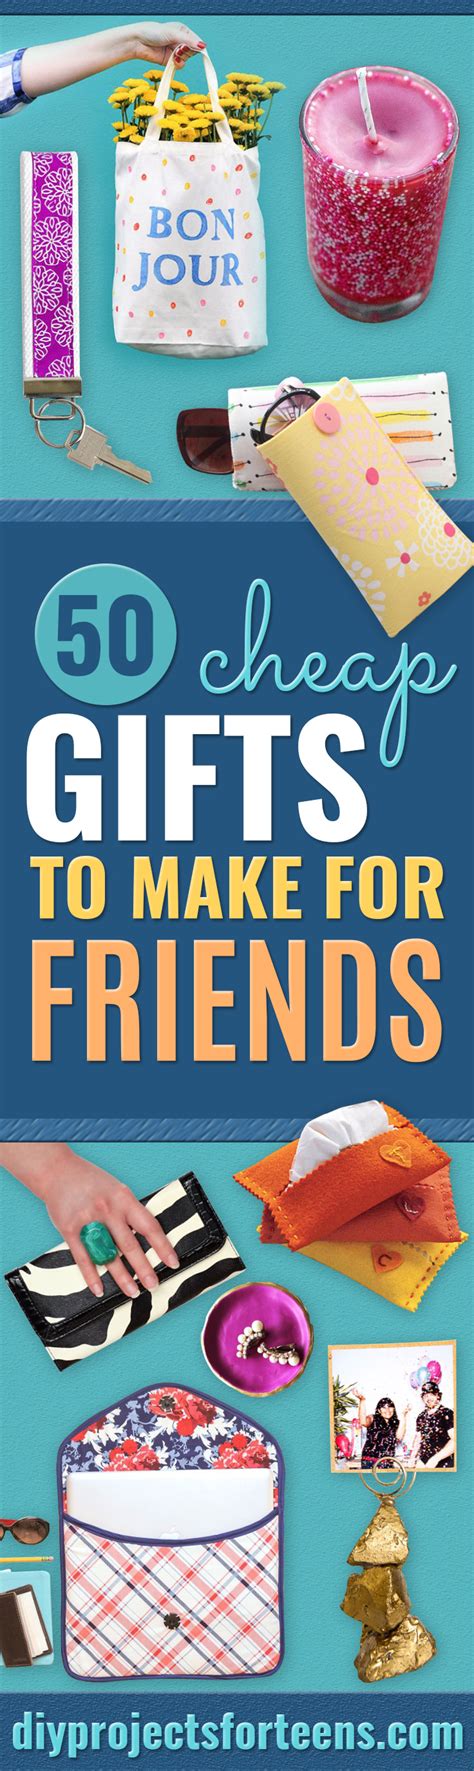 We love the cute little accessories and creative things we wish we had thought of ourselves. 50 Cheap Gifts to Make For Friends